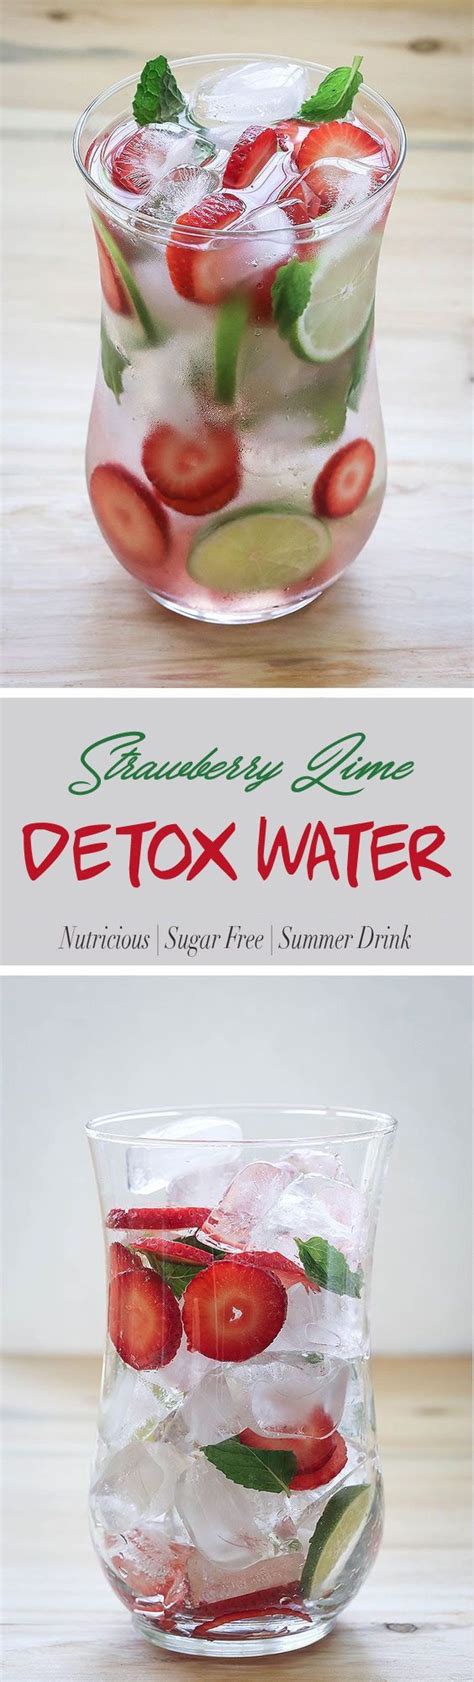 9 Detox Water Recipes For Weight Loss Flat Tummy Glowing Skin